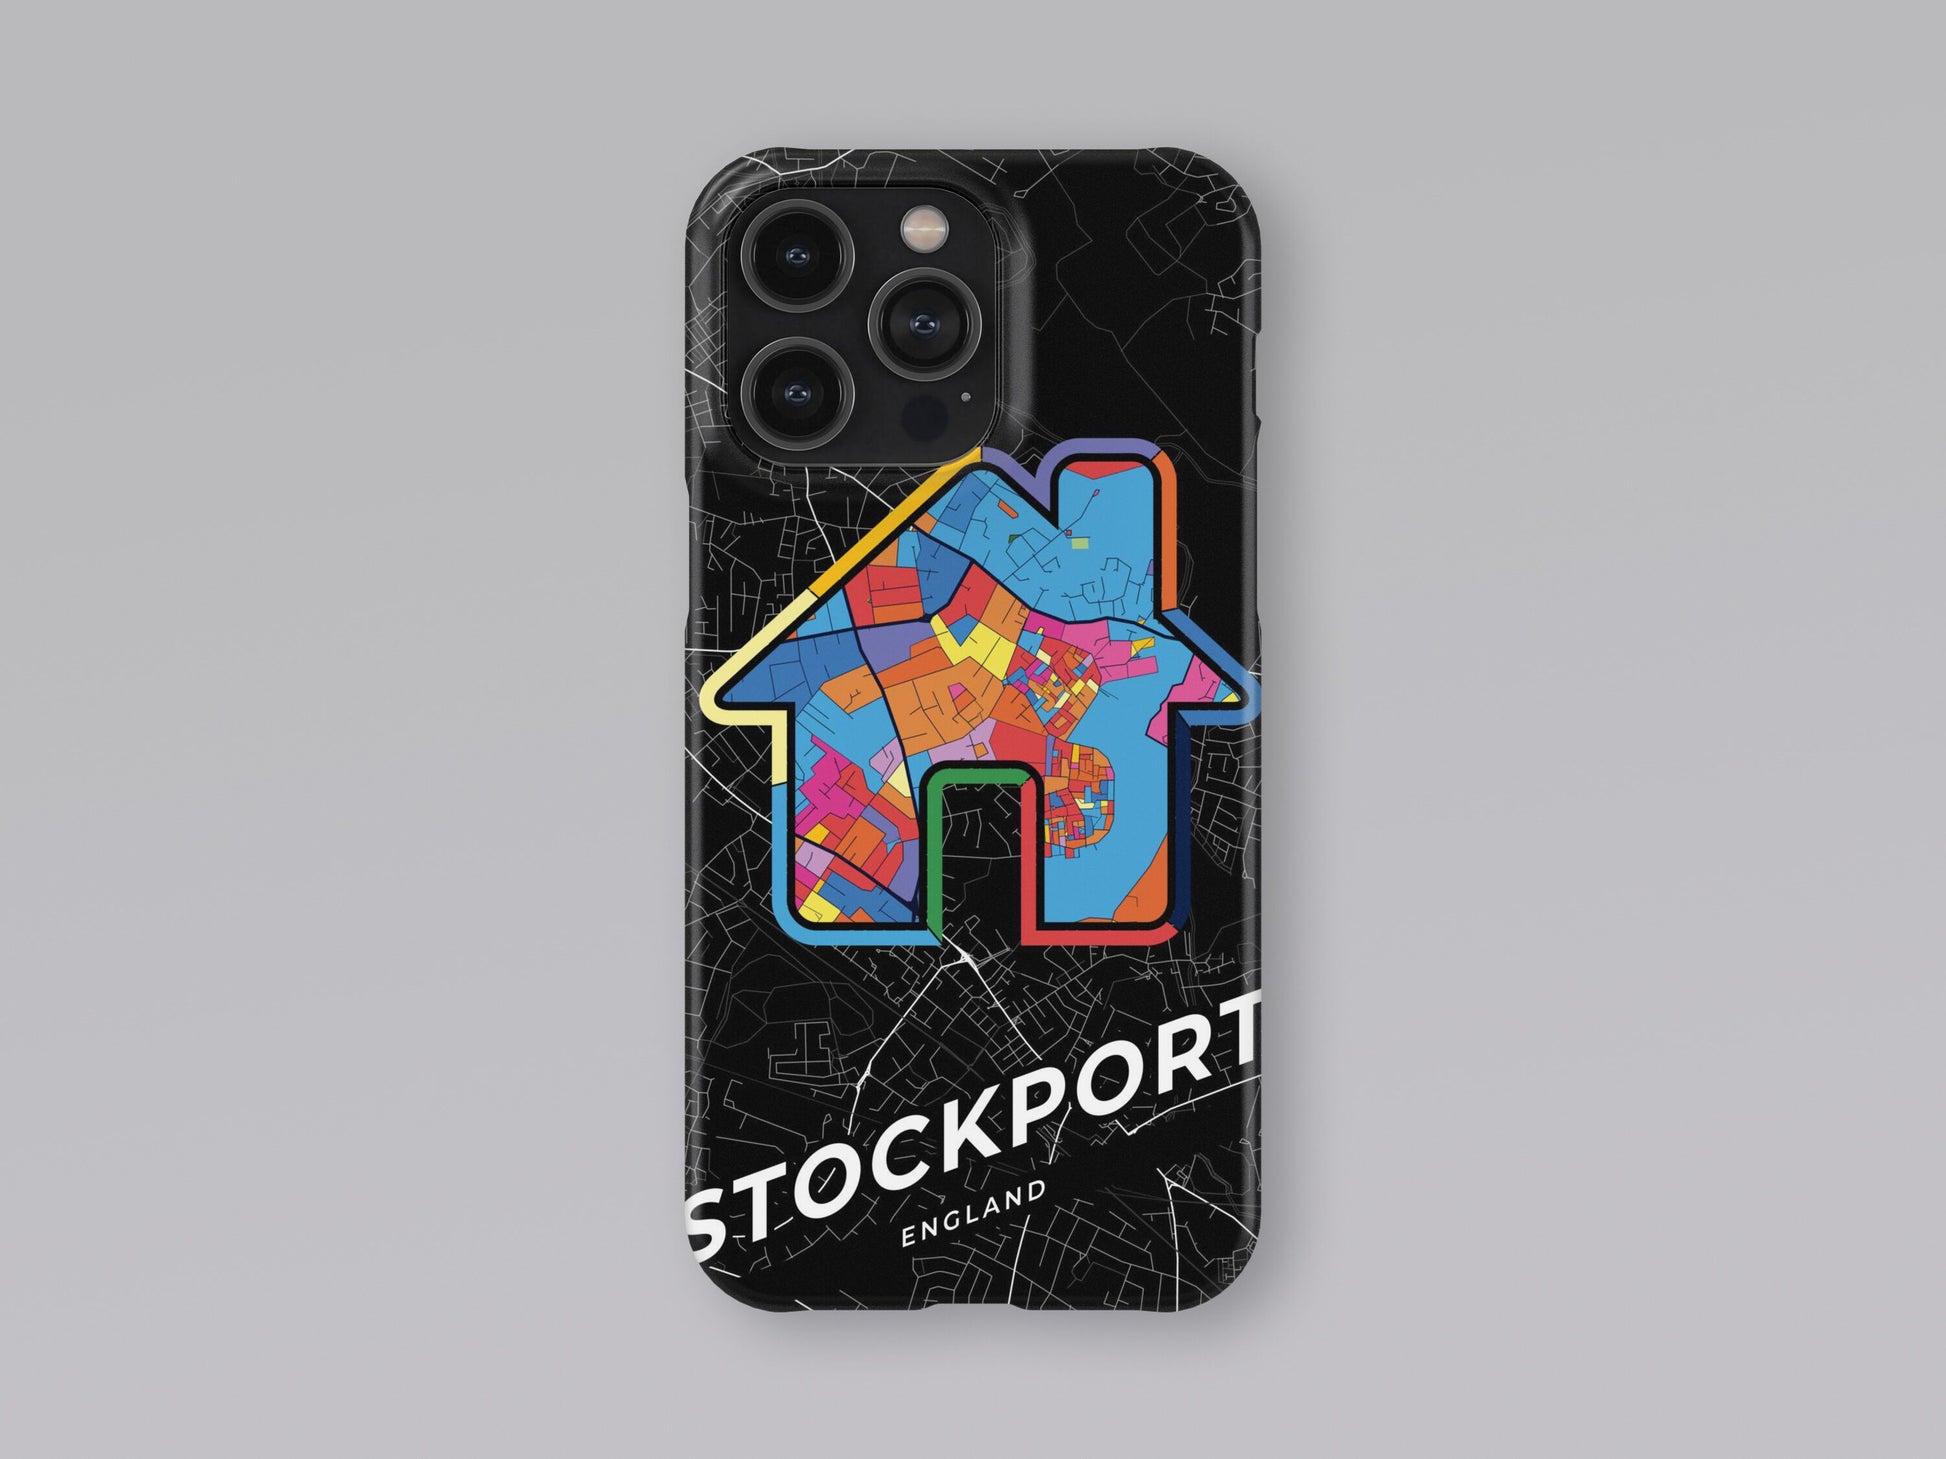 Stockport England slim phone case with colorful icon 3